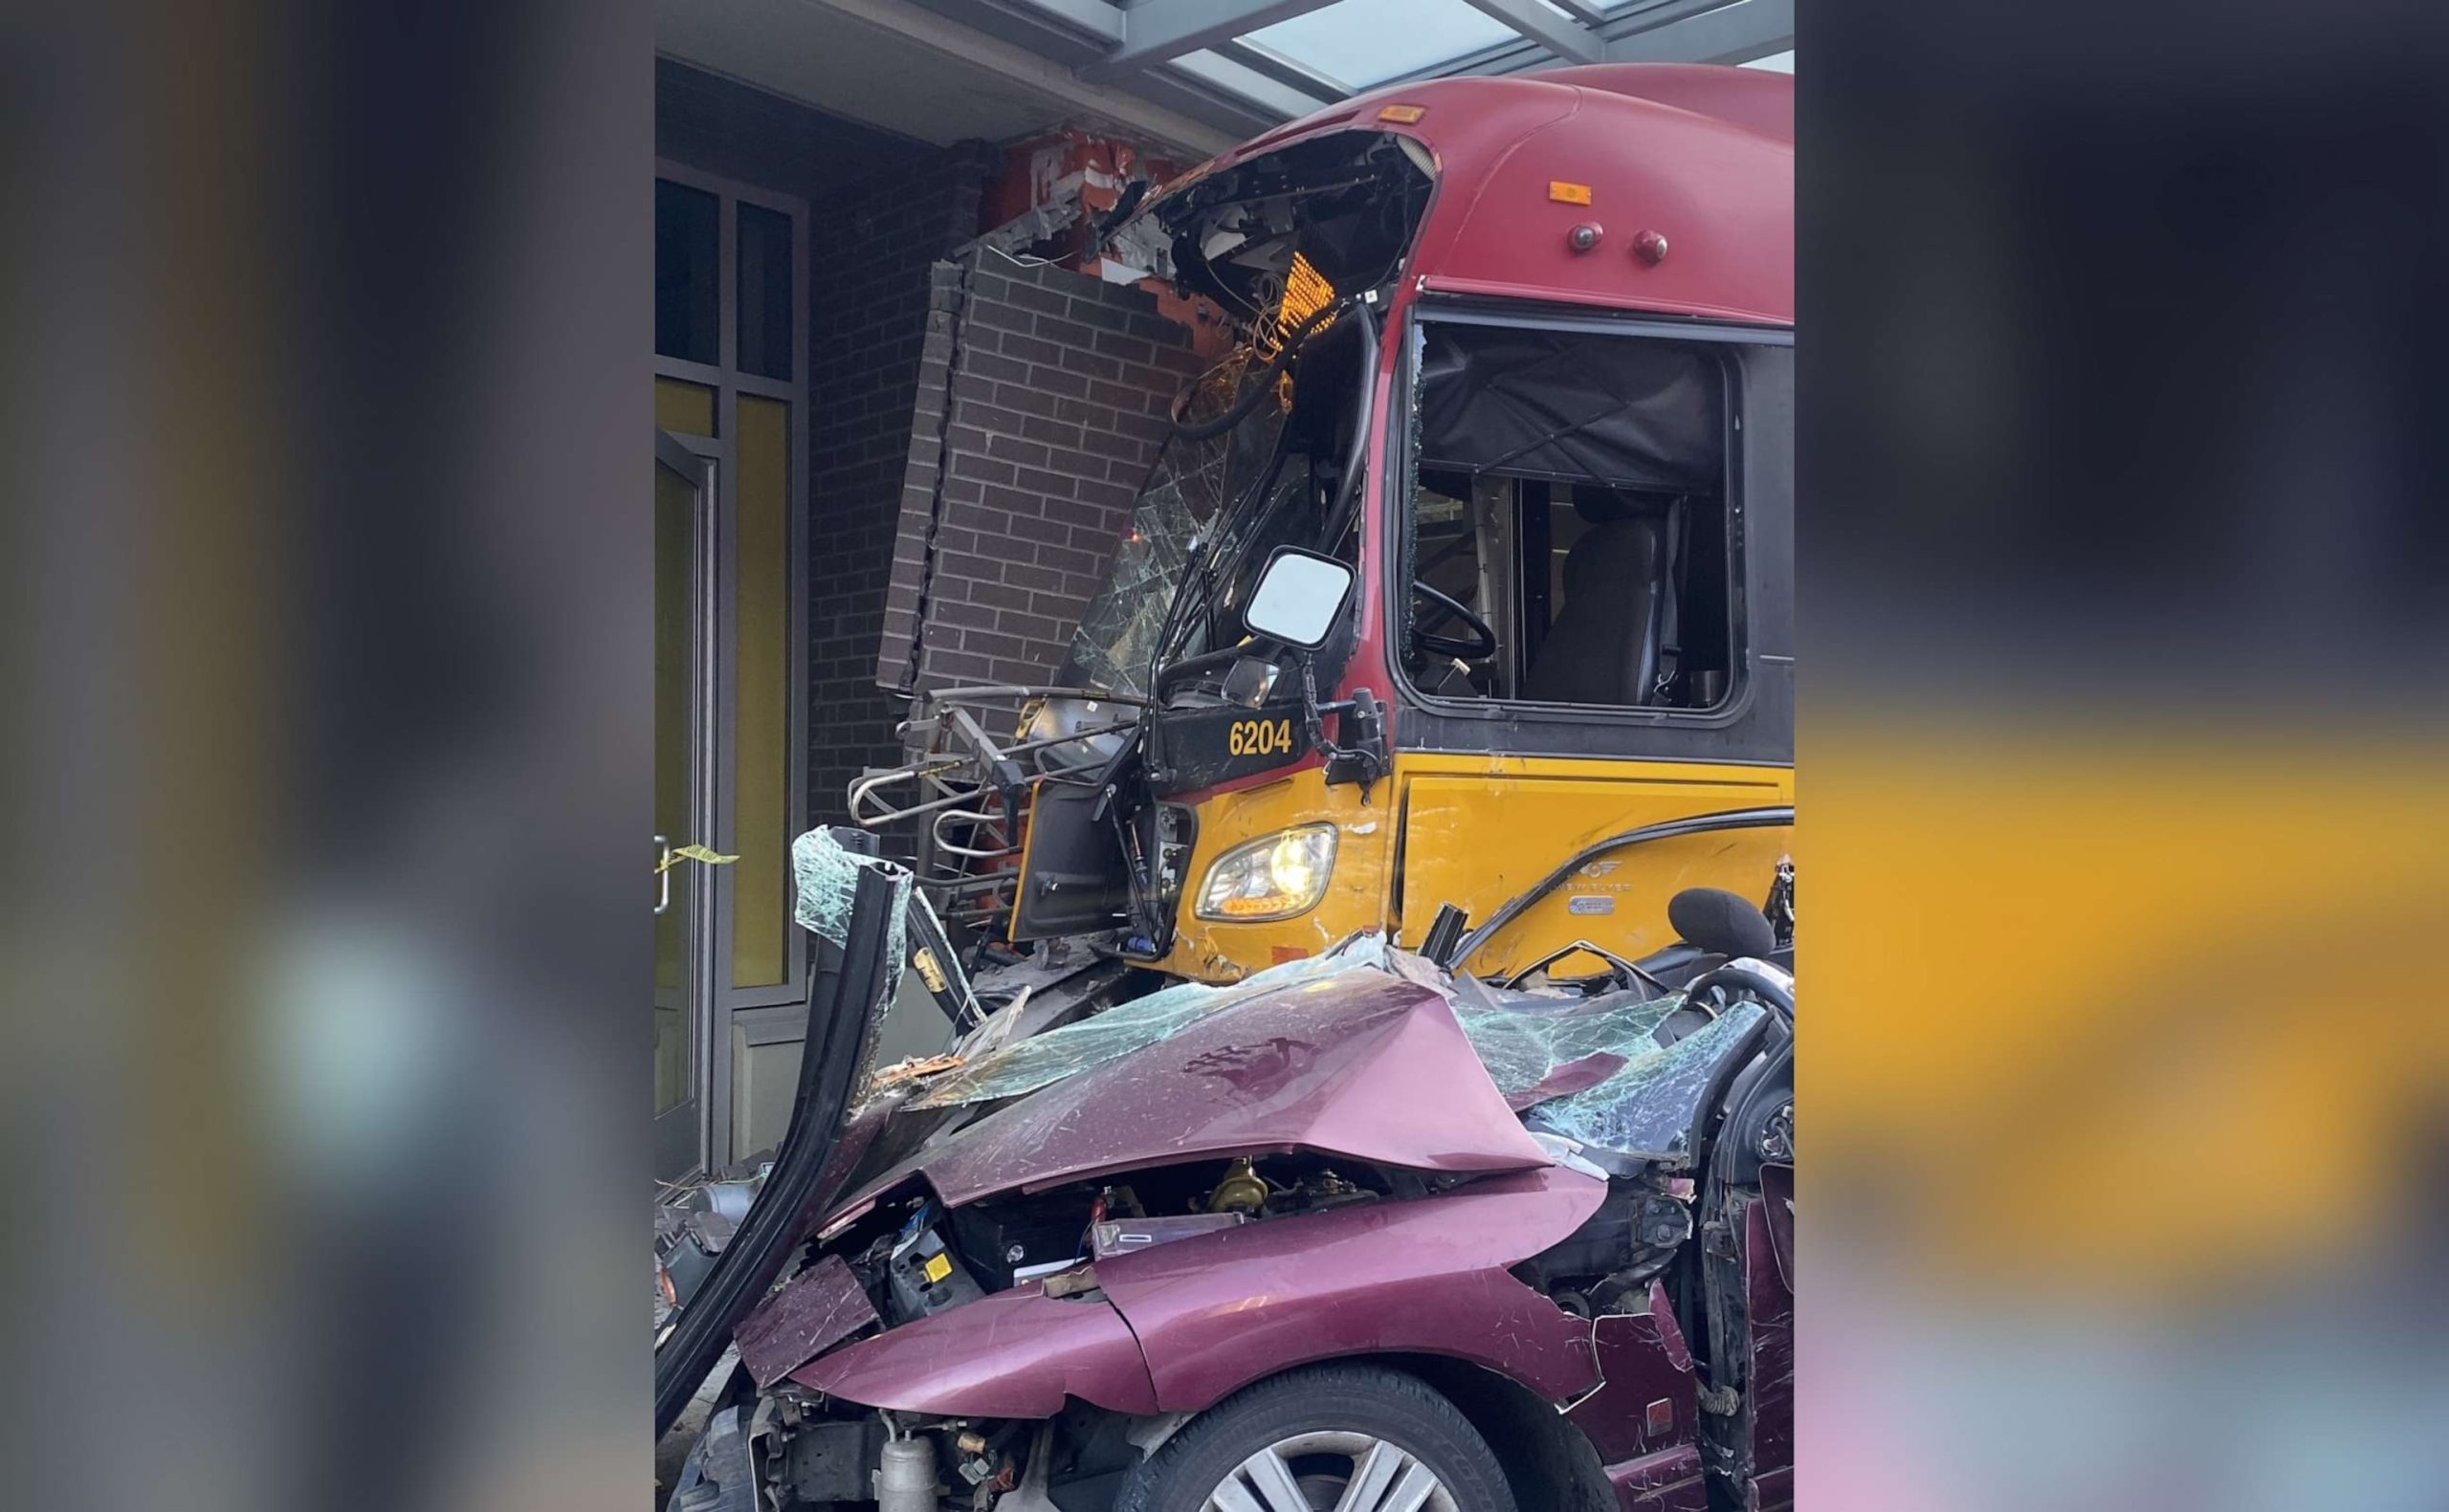 Seattle bus crash results in manslaughter charge, 1 fatality, and 12 injuries